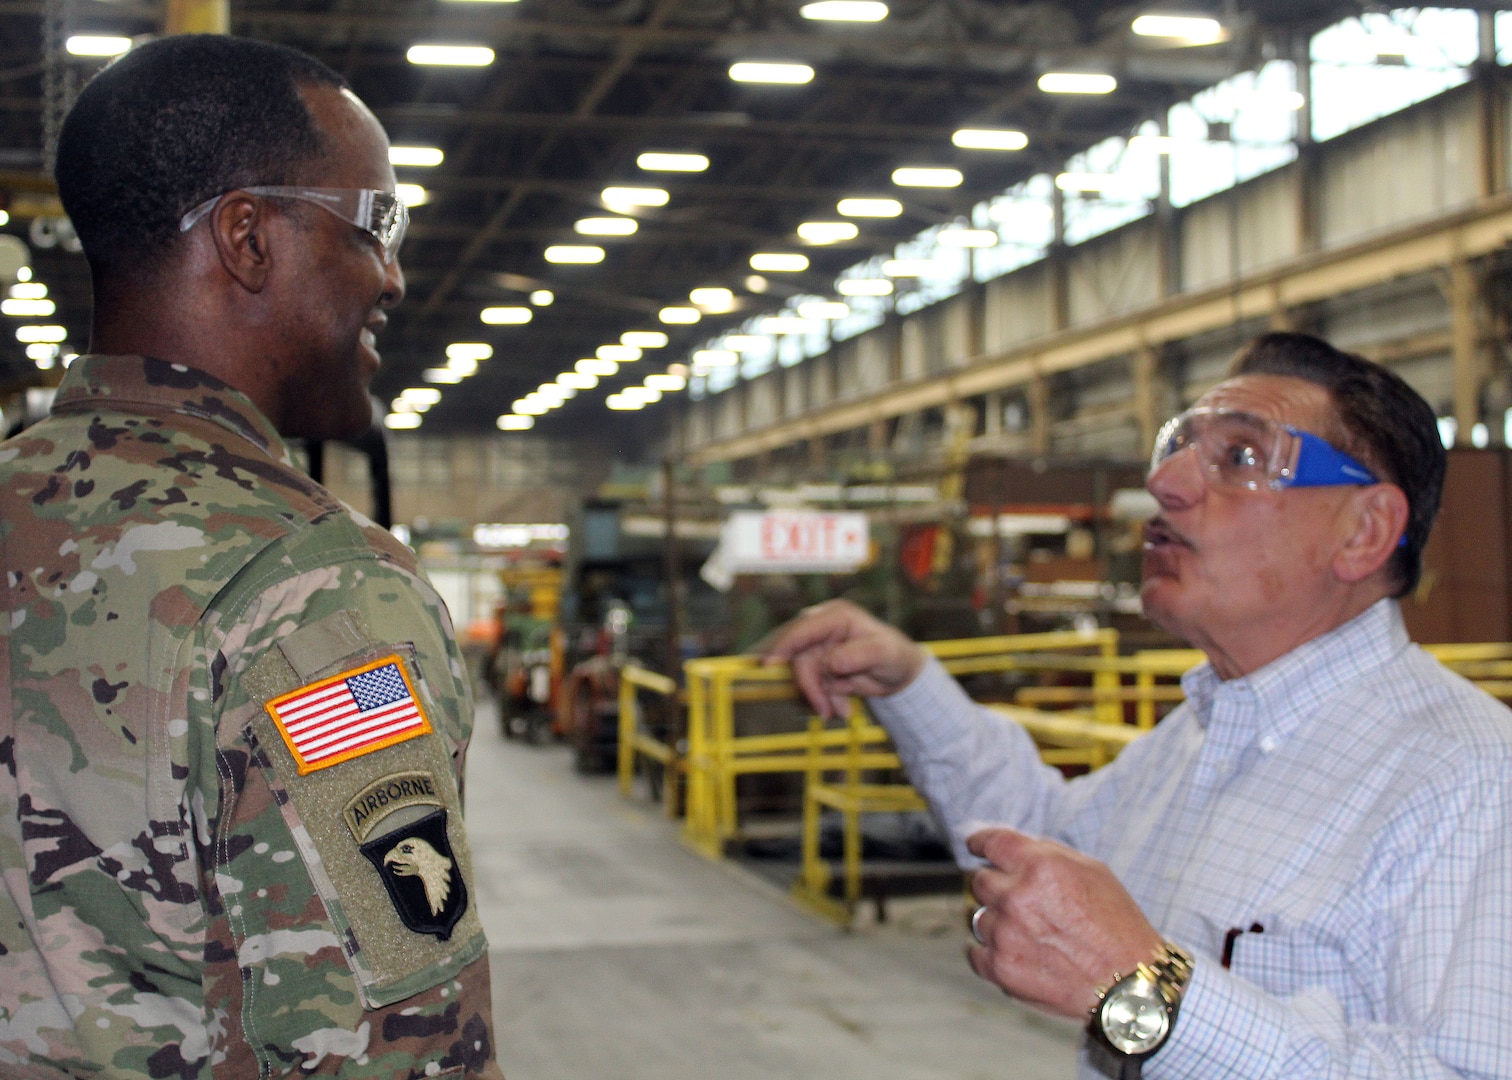 DLA Troop Support Commander Army Brig. Gen. Gavin Lawrence, left, smiles as SPS Technologies Sales Manager Joseph DiGiacomo, right, provides an overview of SPS’ recapitalization of scrap material and how the industry works during a tour of the Jenkintown, Pennsylvania facility Feb. 5, 2020.